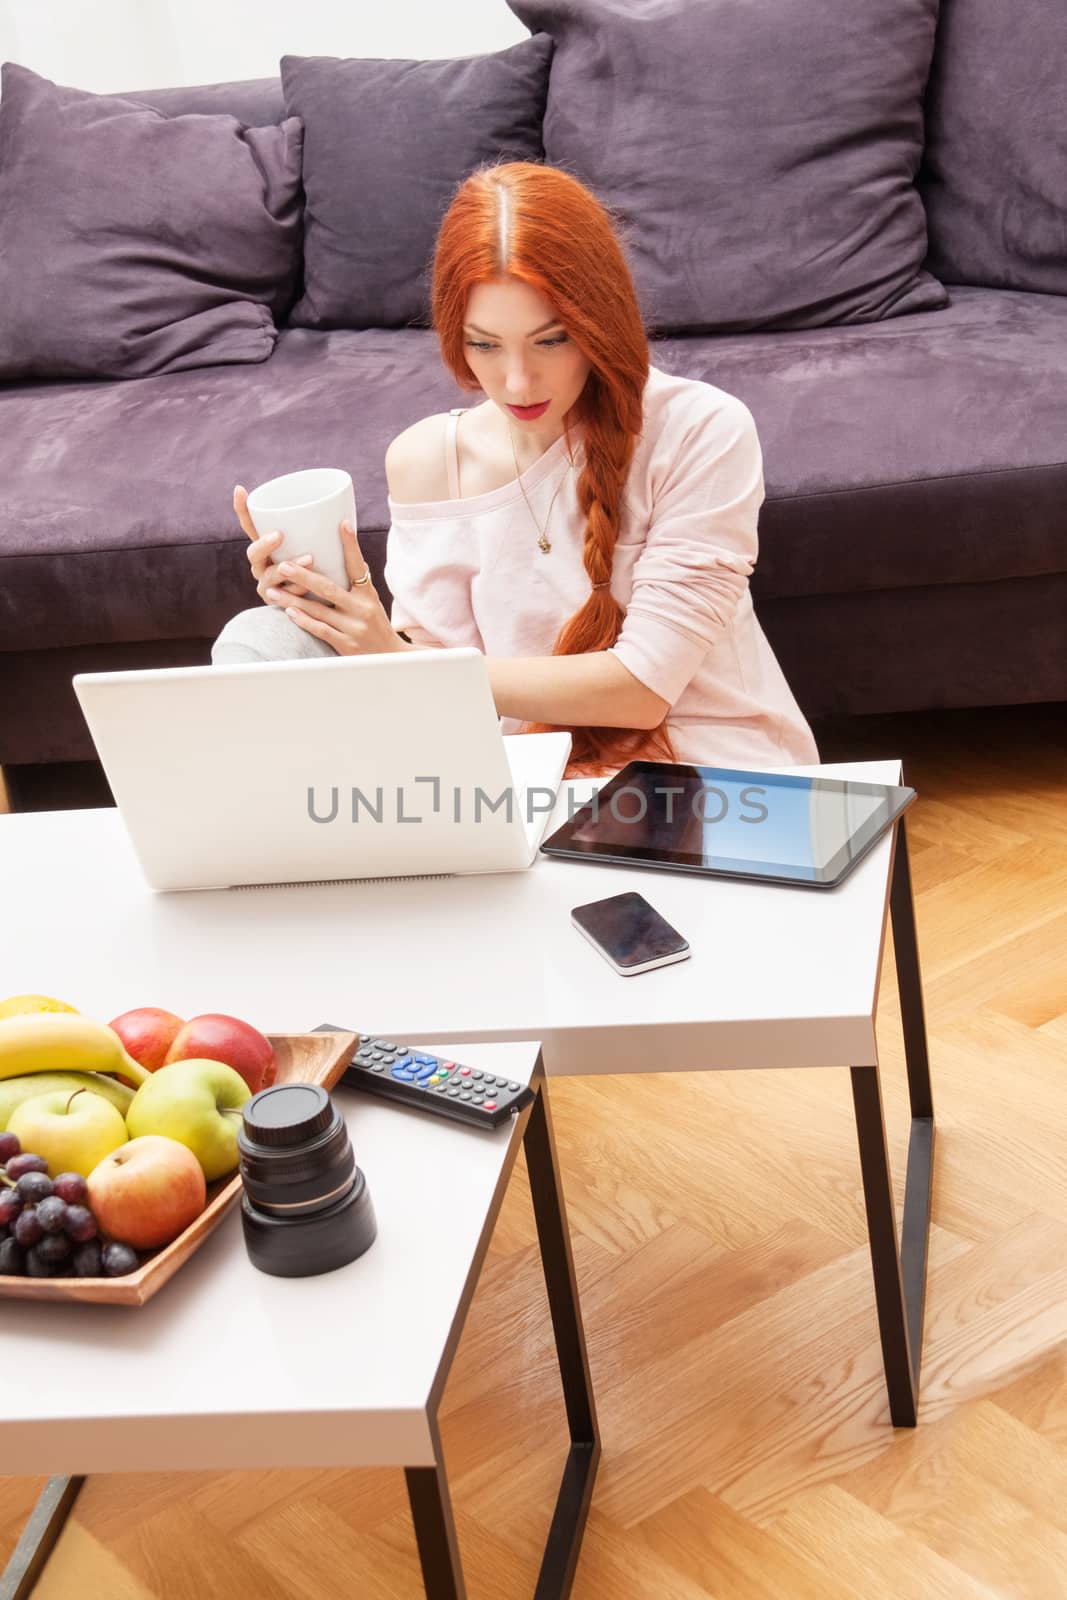 Pretty Young Woman Using her Laptop Computer In the Living Room with Feet on the Table and Showing Serious Face.